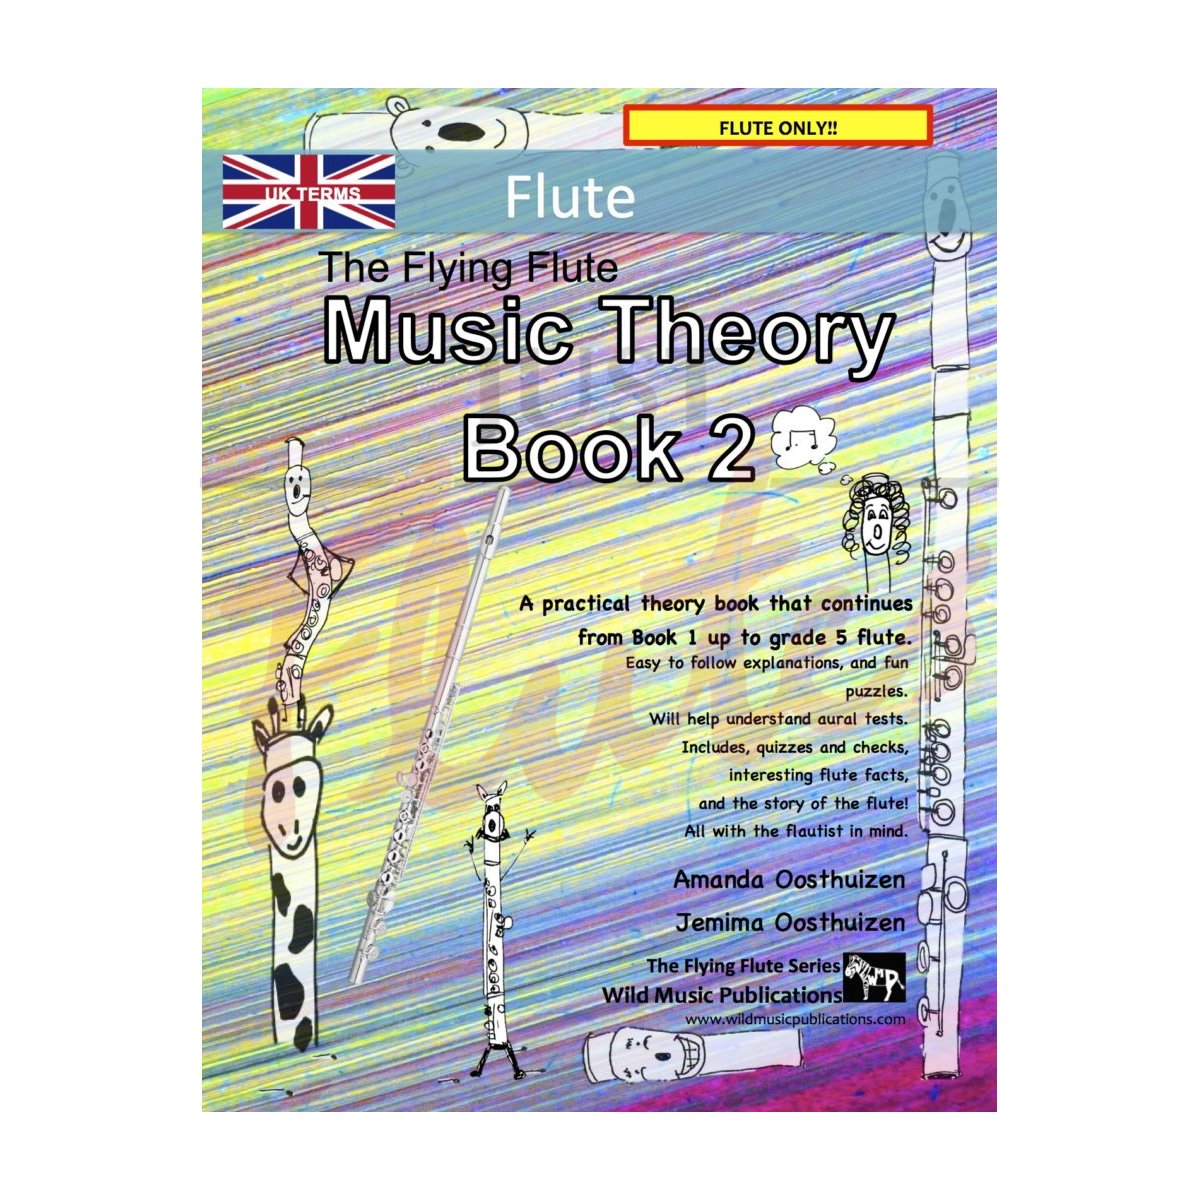 The Flying Flute Music Theory Book 2 [Flute]